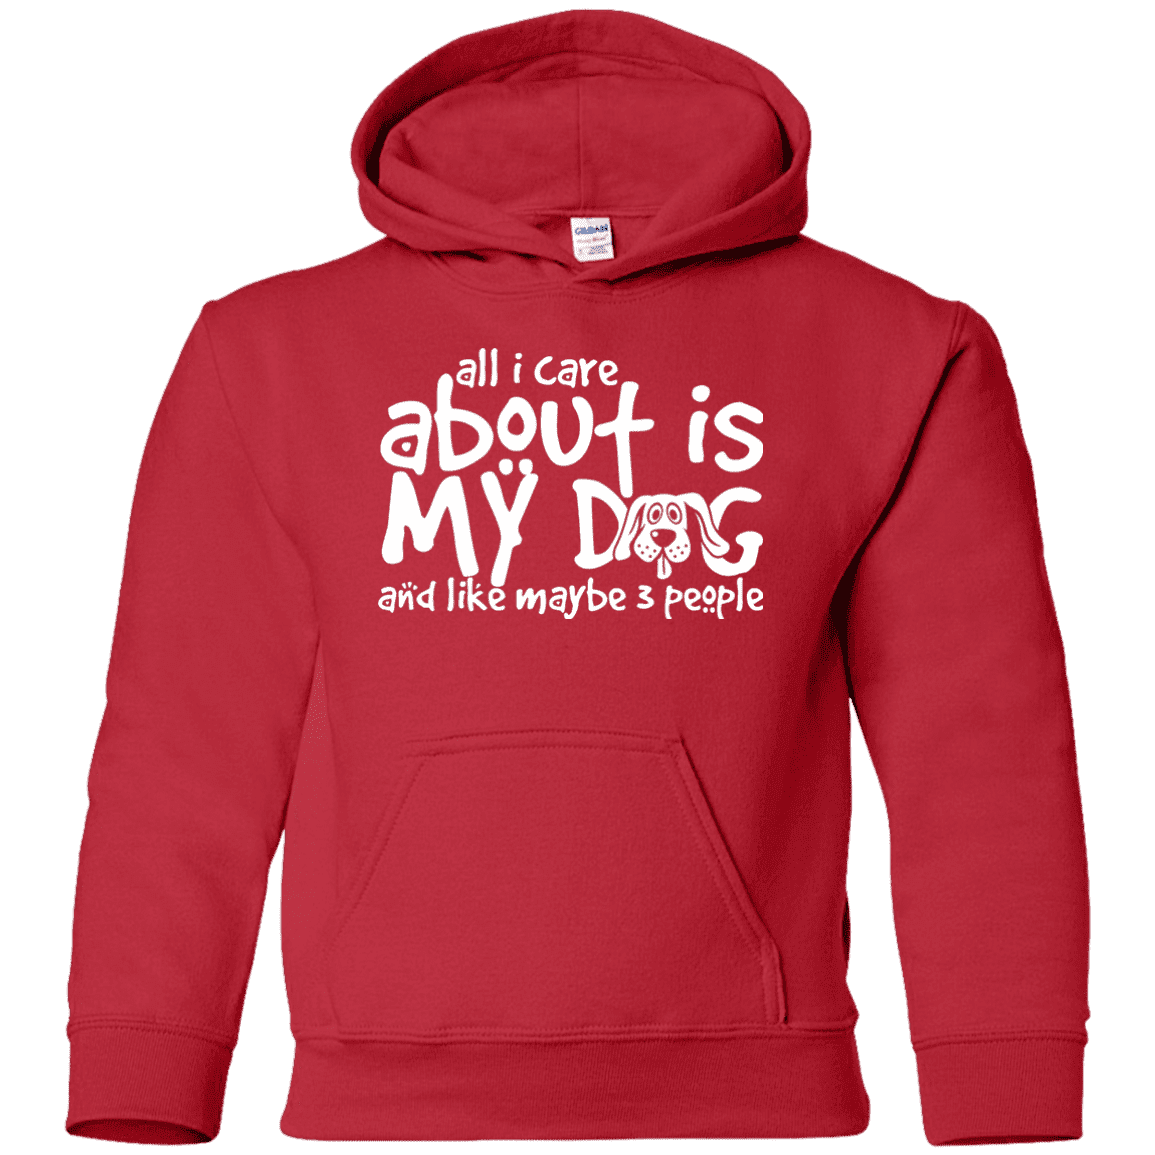 All I Care About Is My Dog - Youth Hoodie.